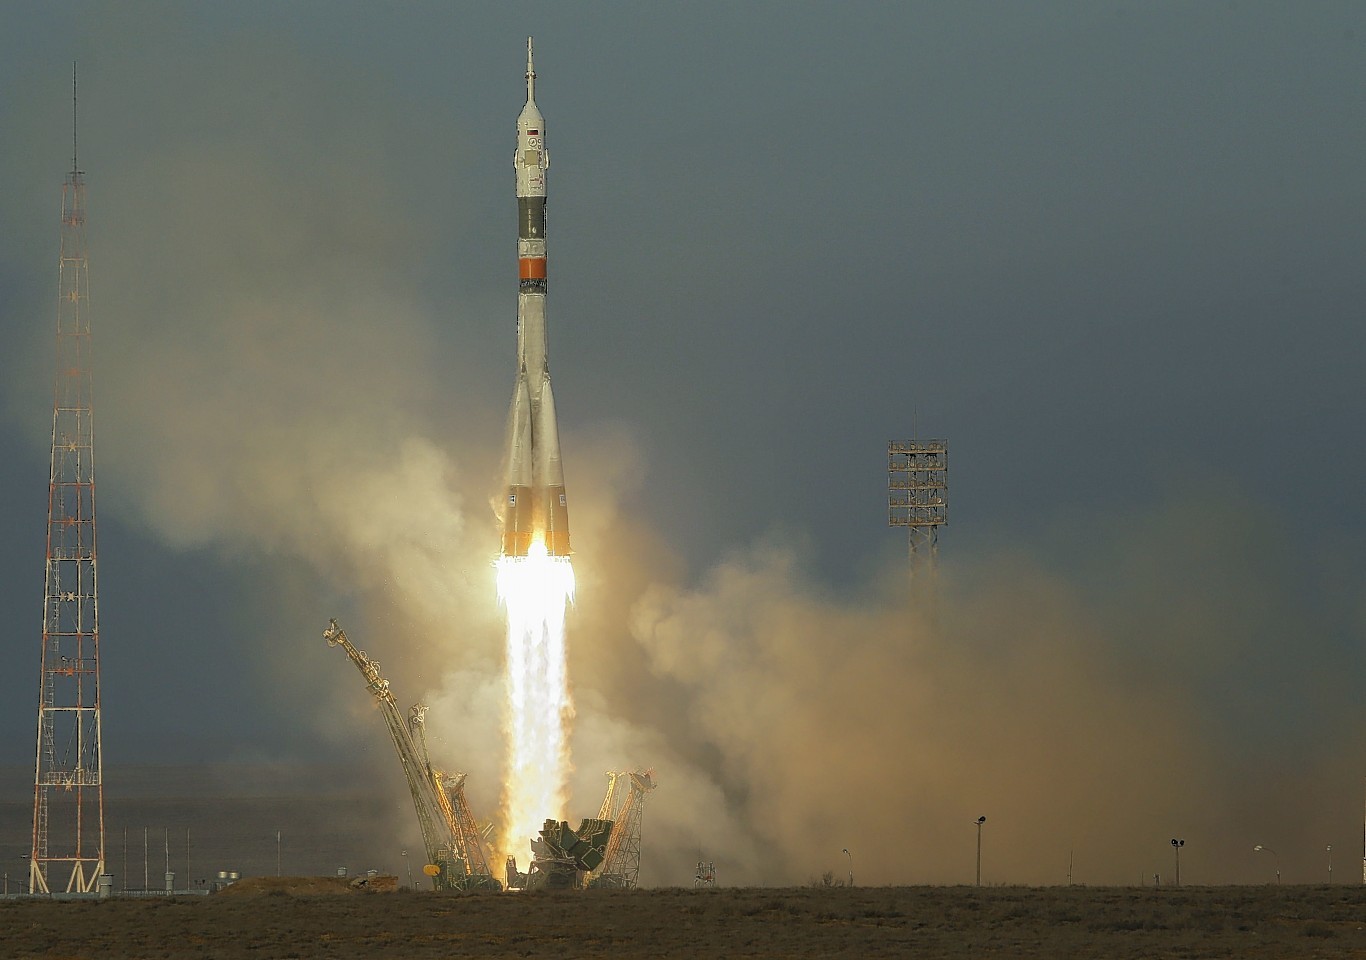 The Soyuz-FG rocket booster with Soyuz TMA-19M space ship carrying the crew to the International Space Station